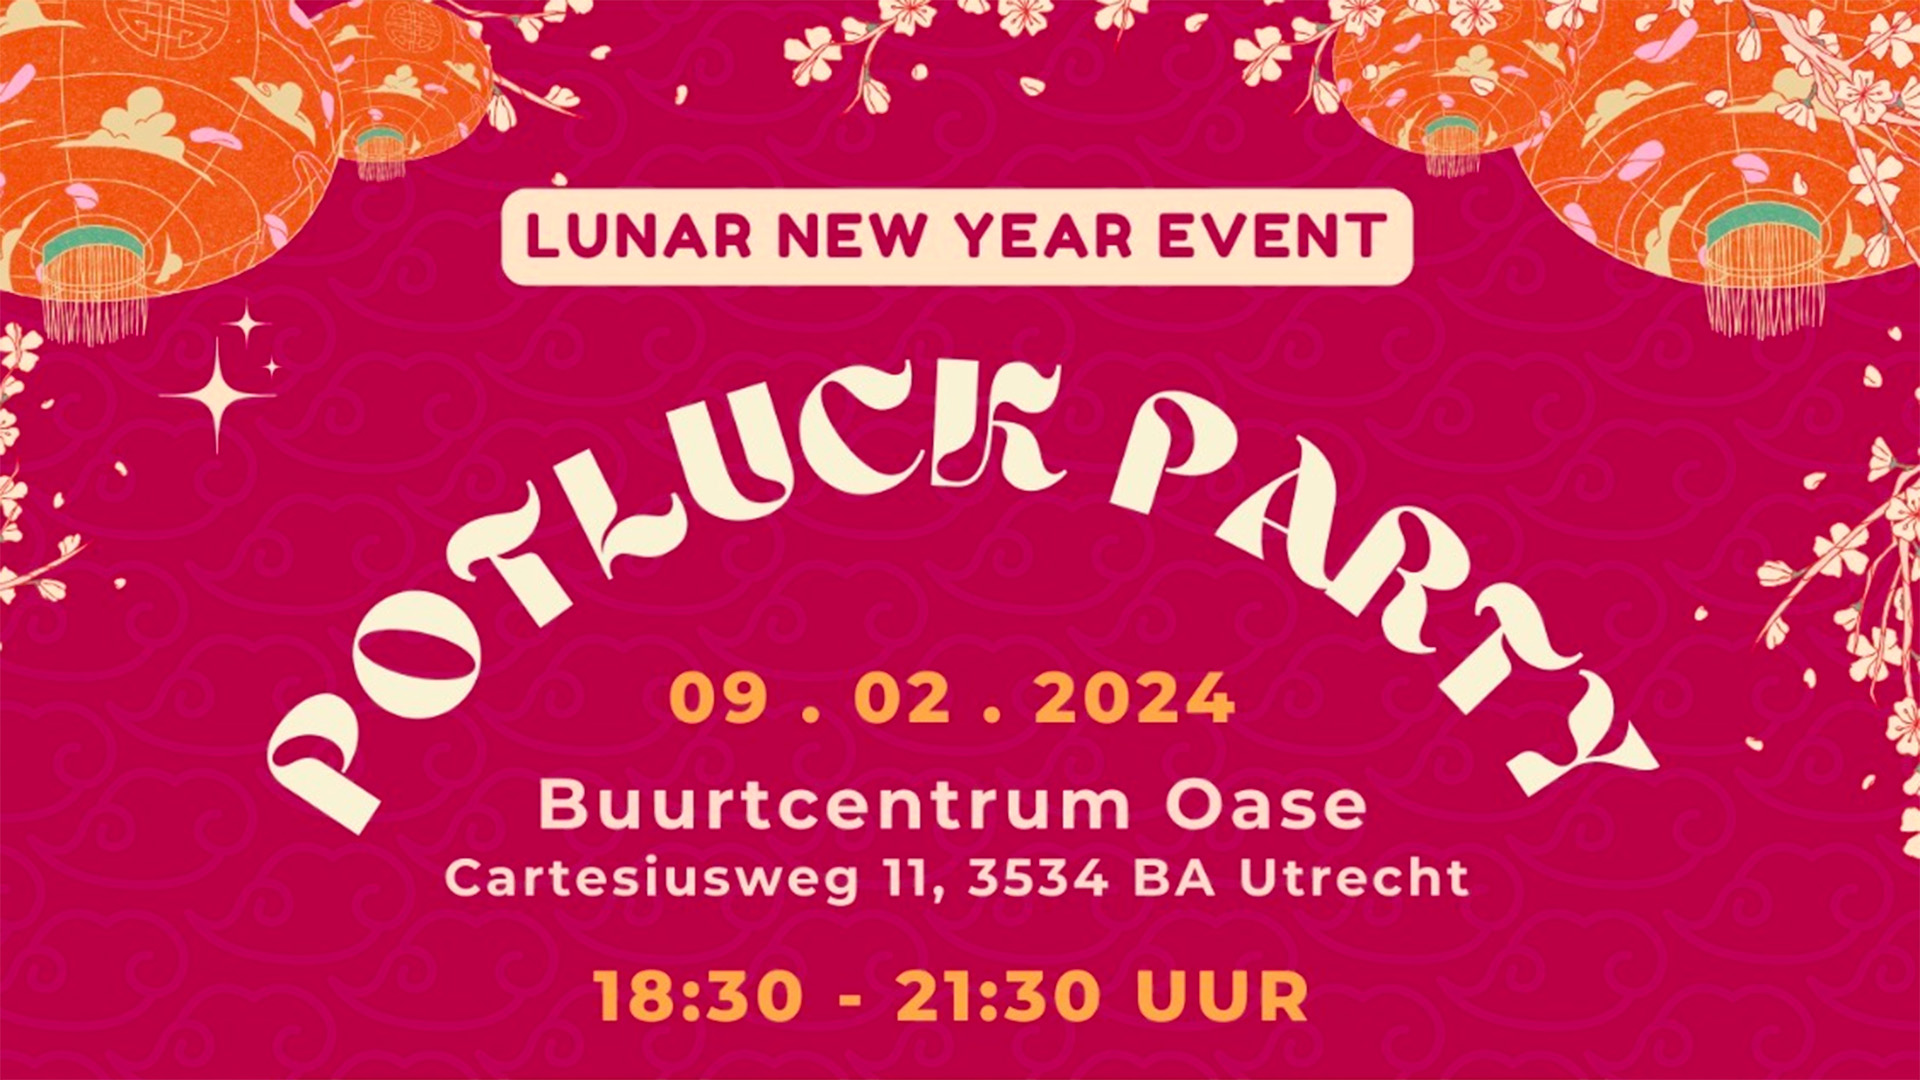 POTLUCKPARTY: LUNAR NEW YEAR EVENT